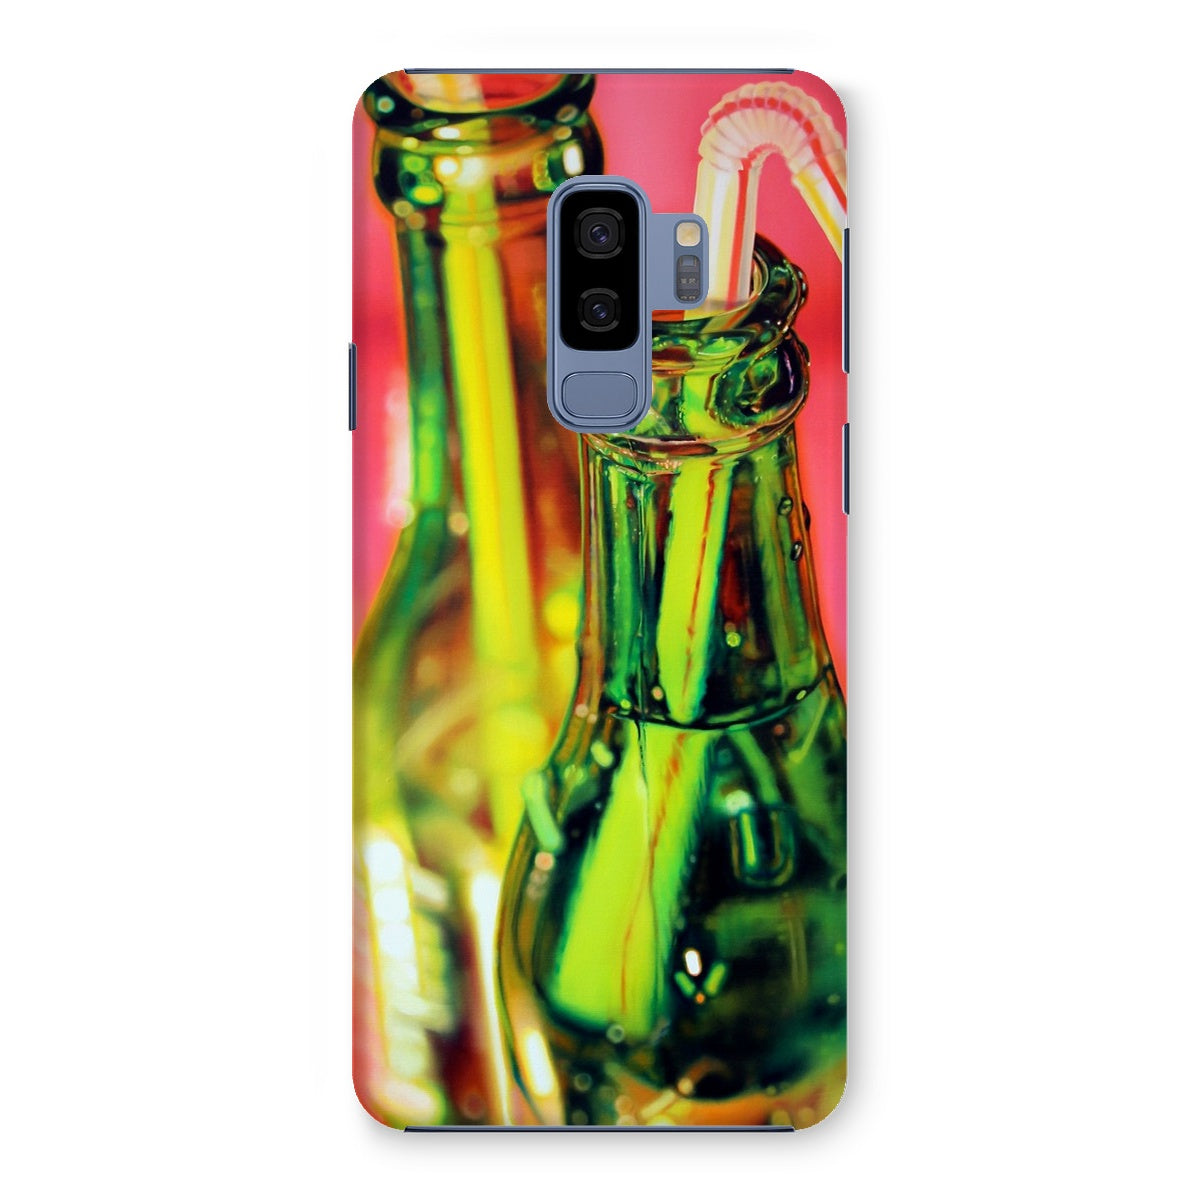 Two Green Bottles Snap Phone Case